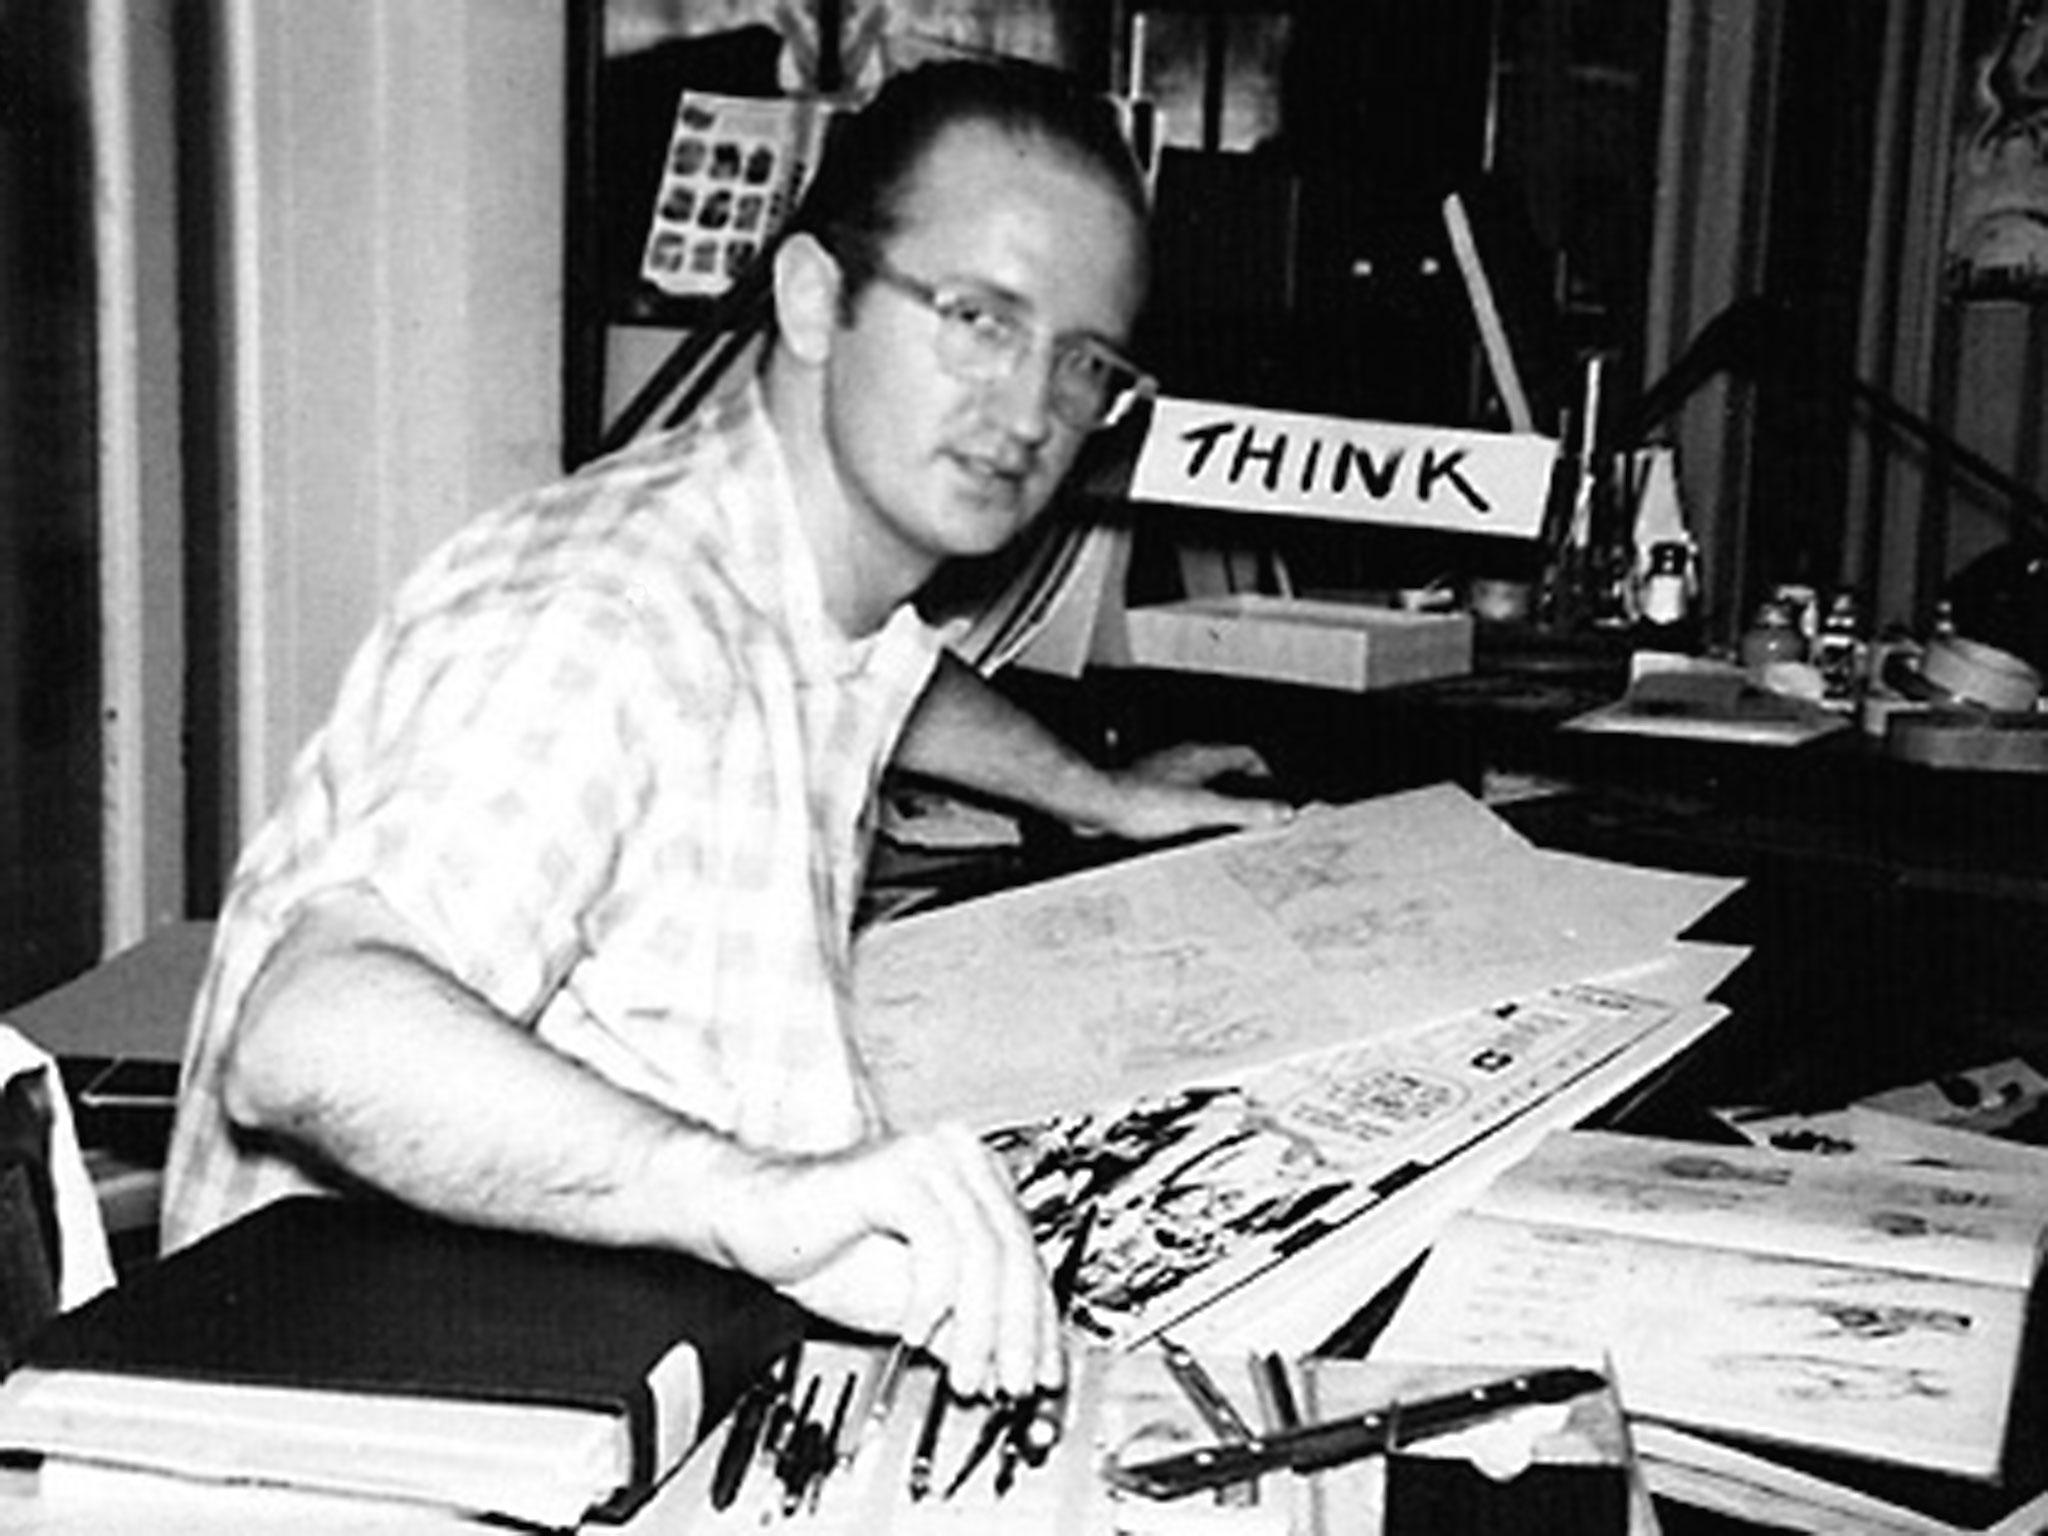 Artist Steve Ditko is humble about his involvement in the creation of Doctor Strange